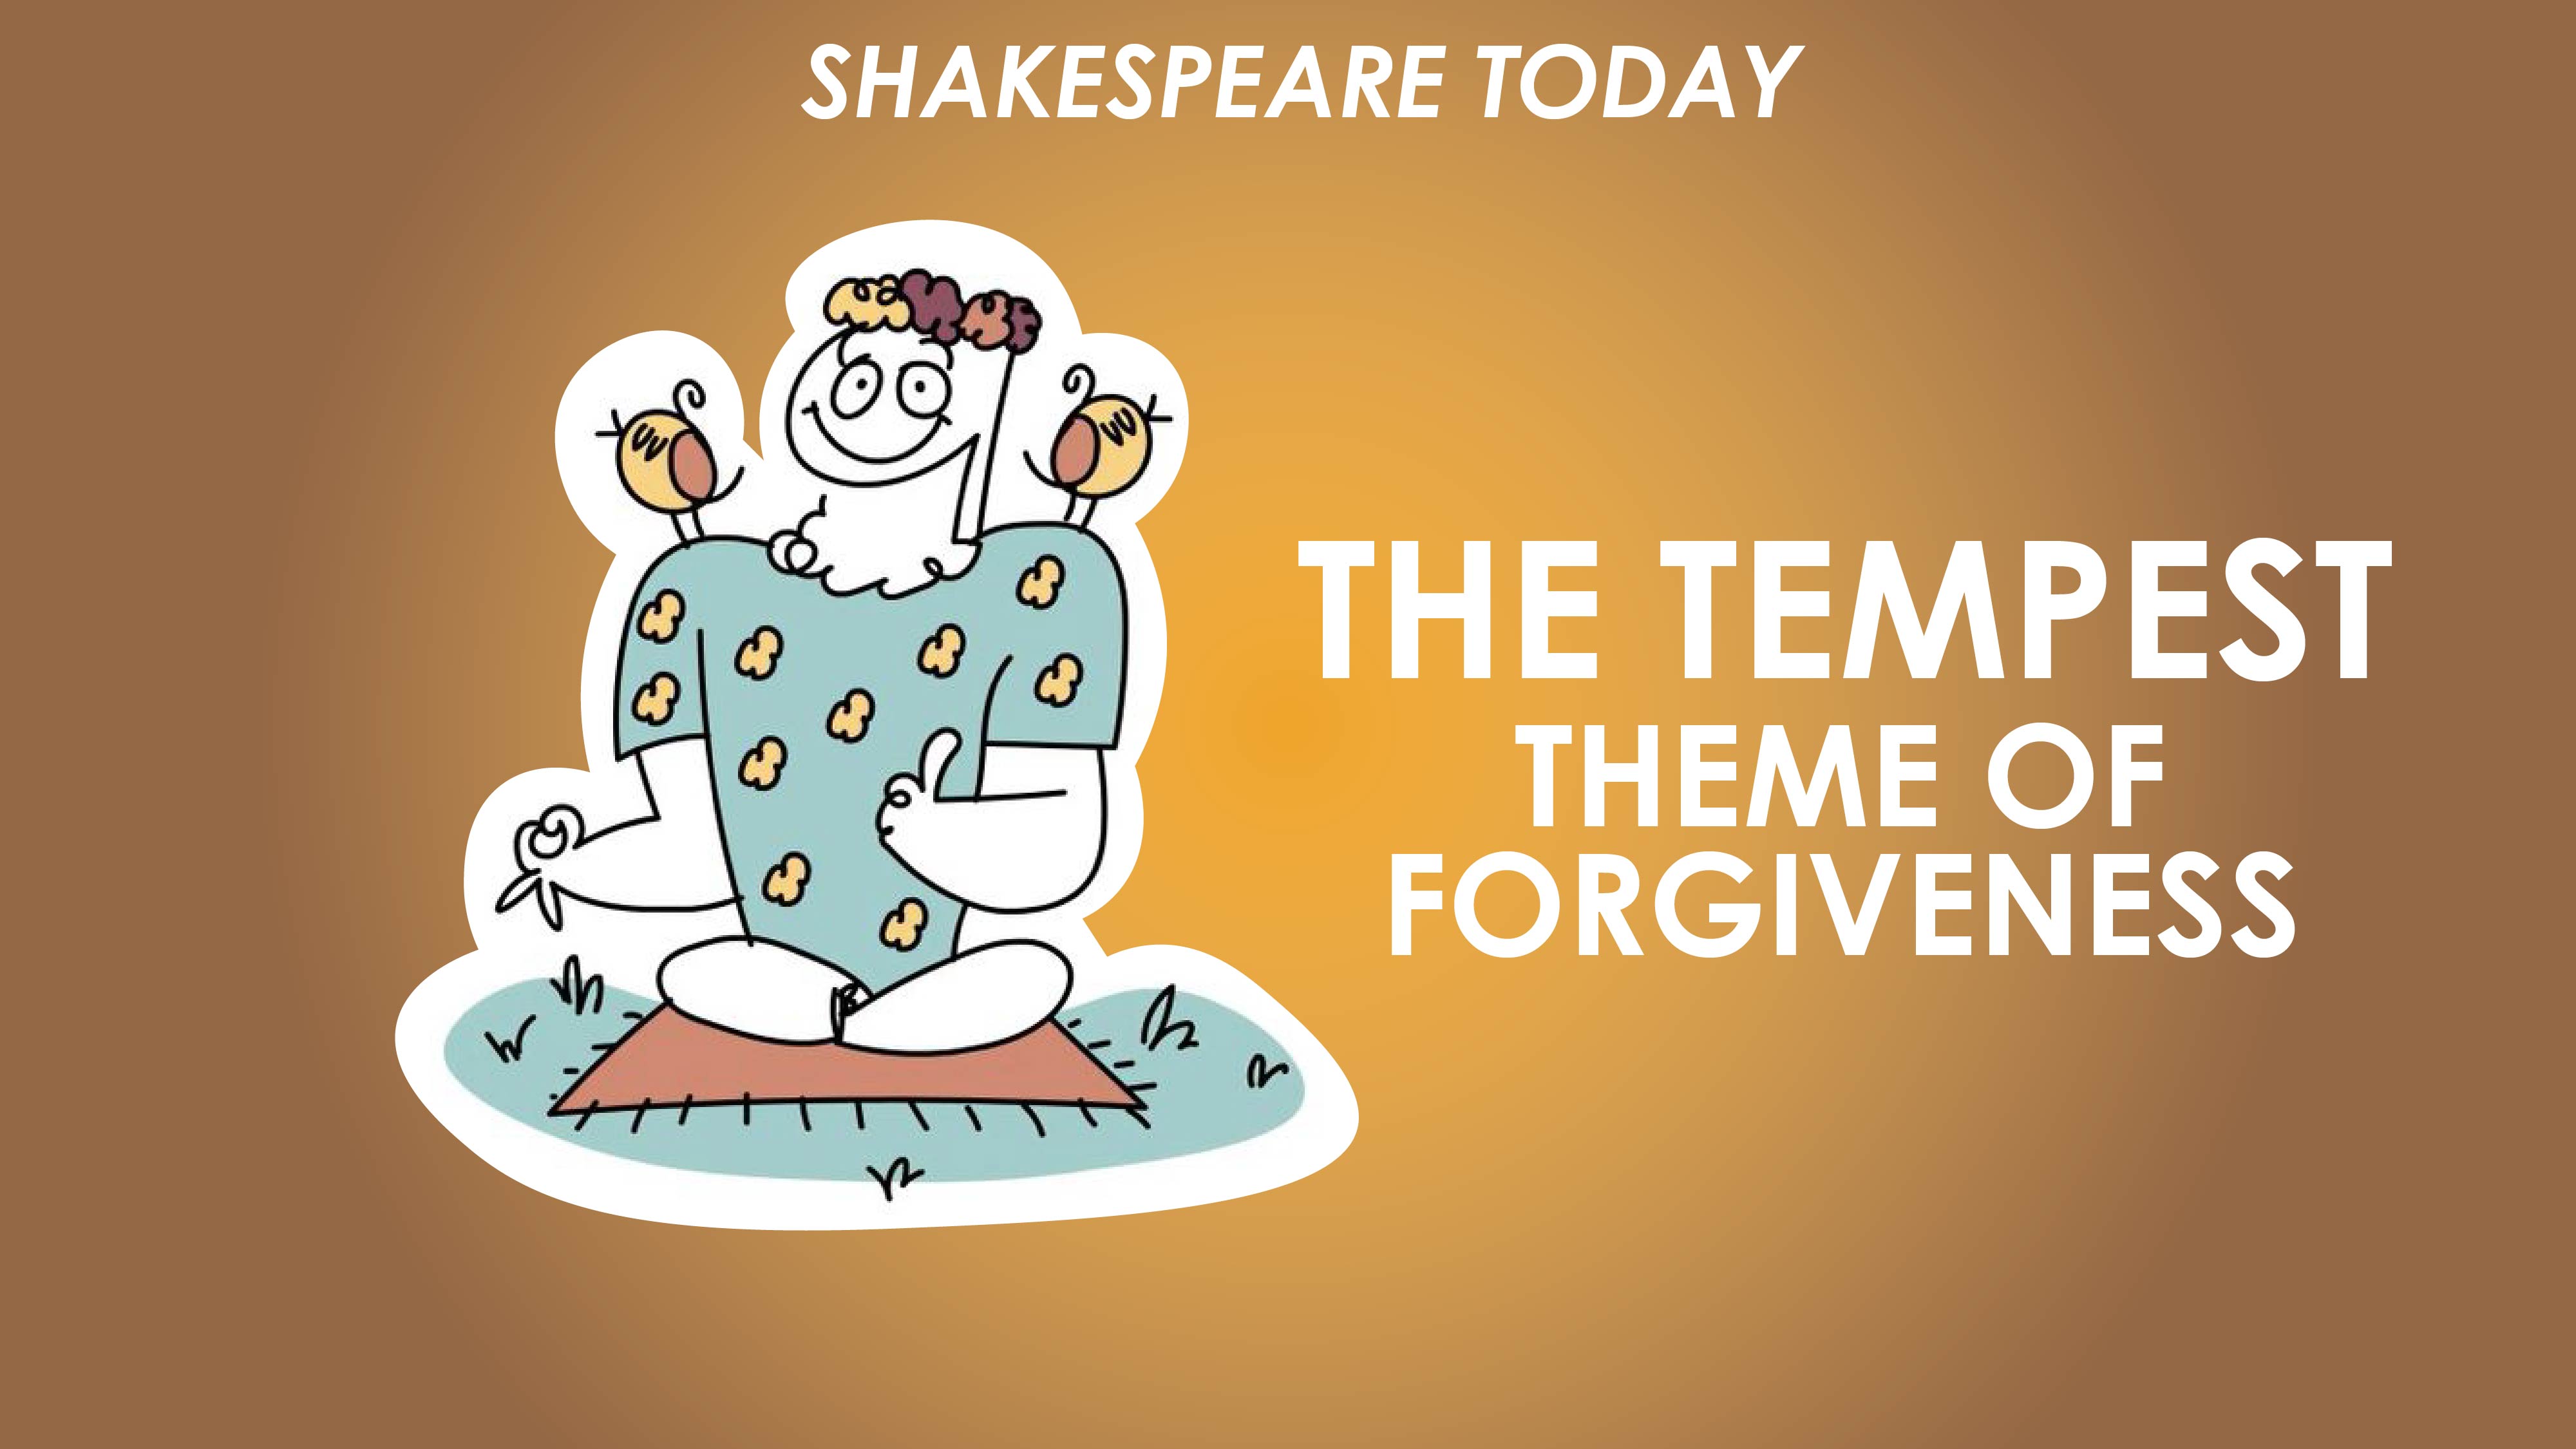 The Tempest Theme of Forgiveness - Shakespeare Today Series